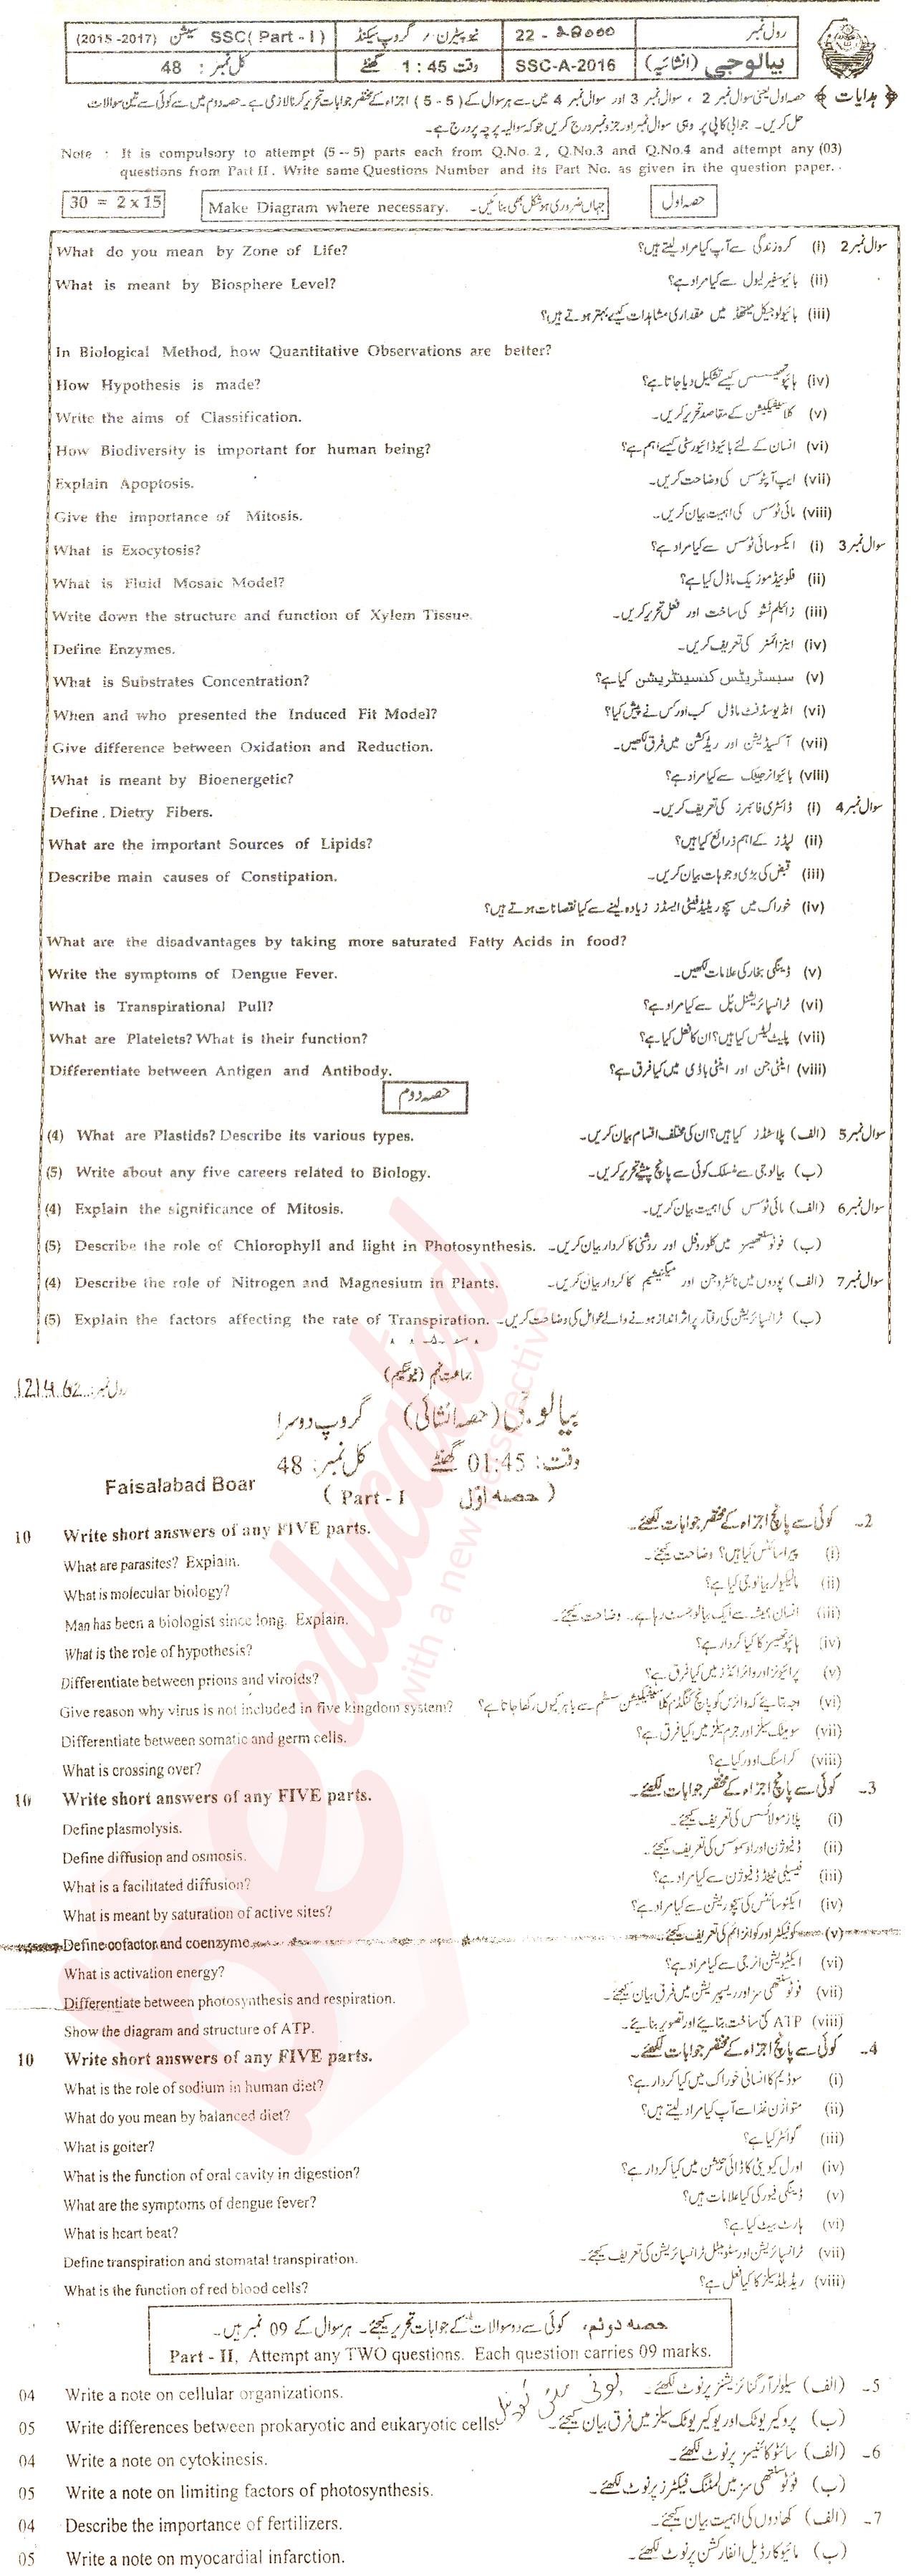 Biology 9th class Past Paper Group 2 BISE Faisalabad 2016